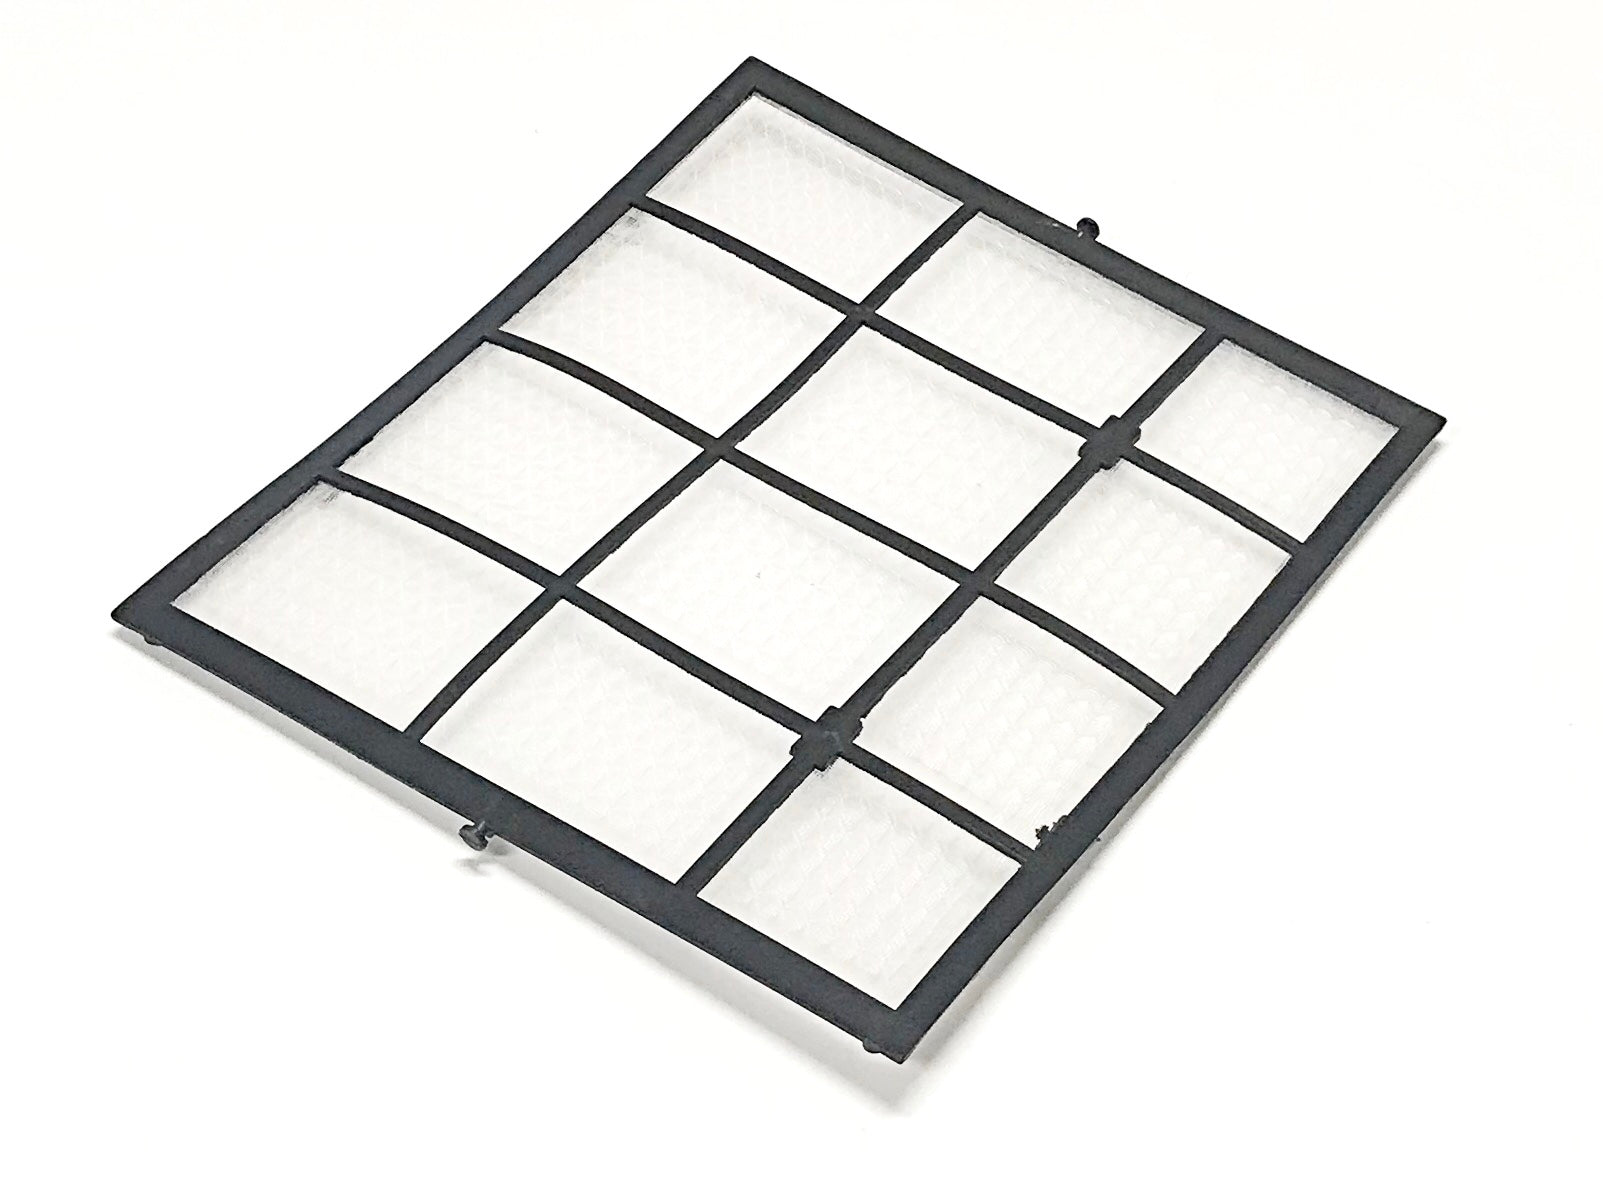 OEM Delonghi Air Conditioner AC Upper Air Filter Originally Shipped With PACWE125, PACWE130